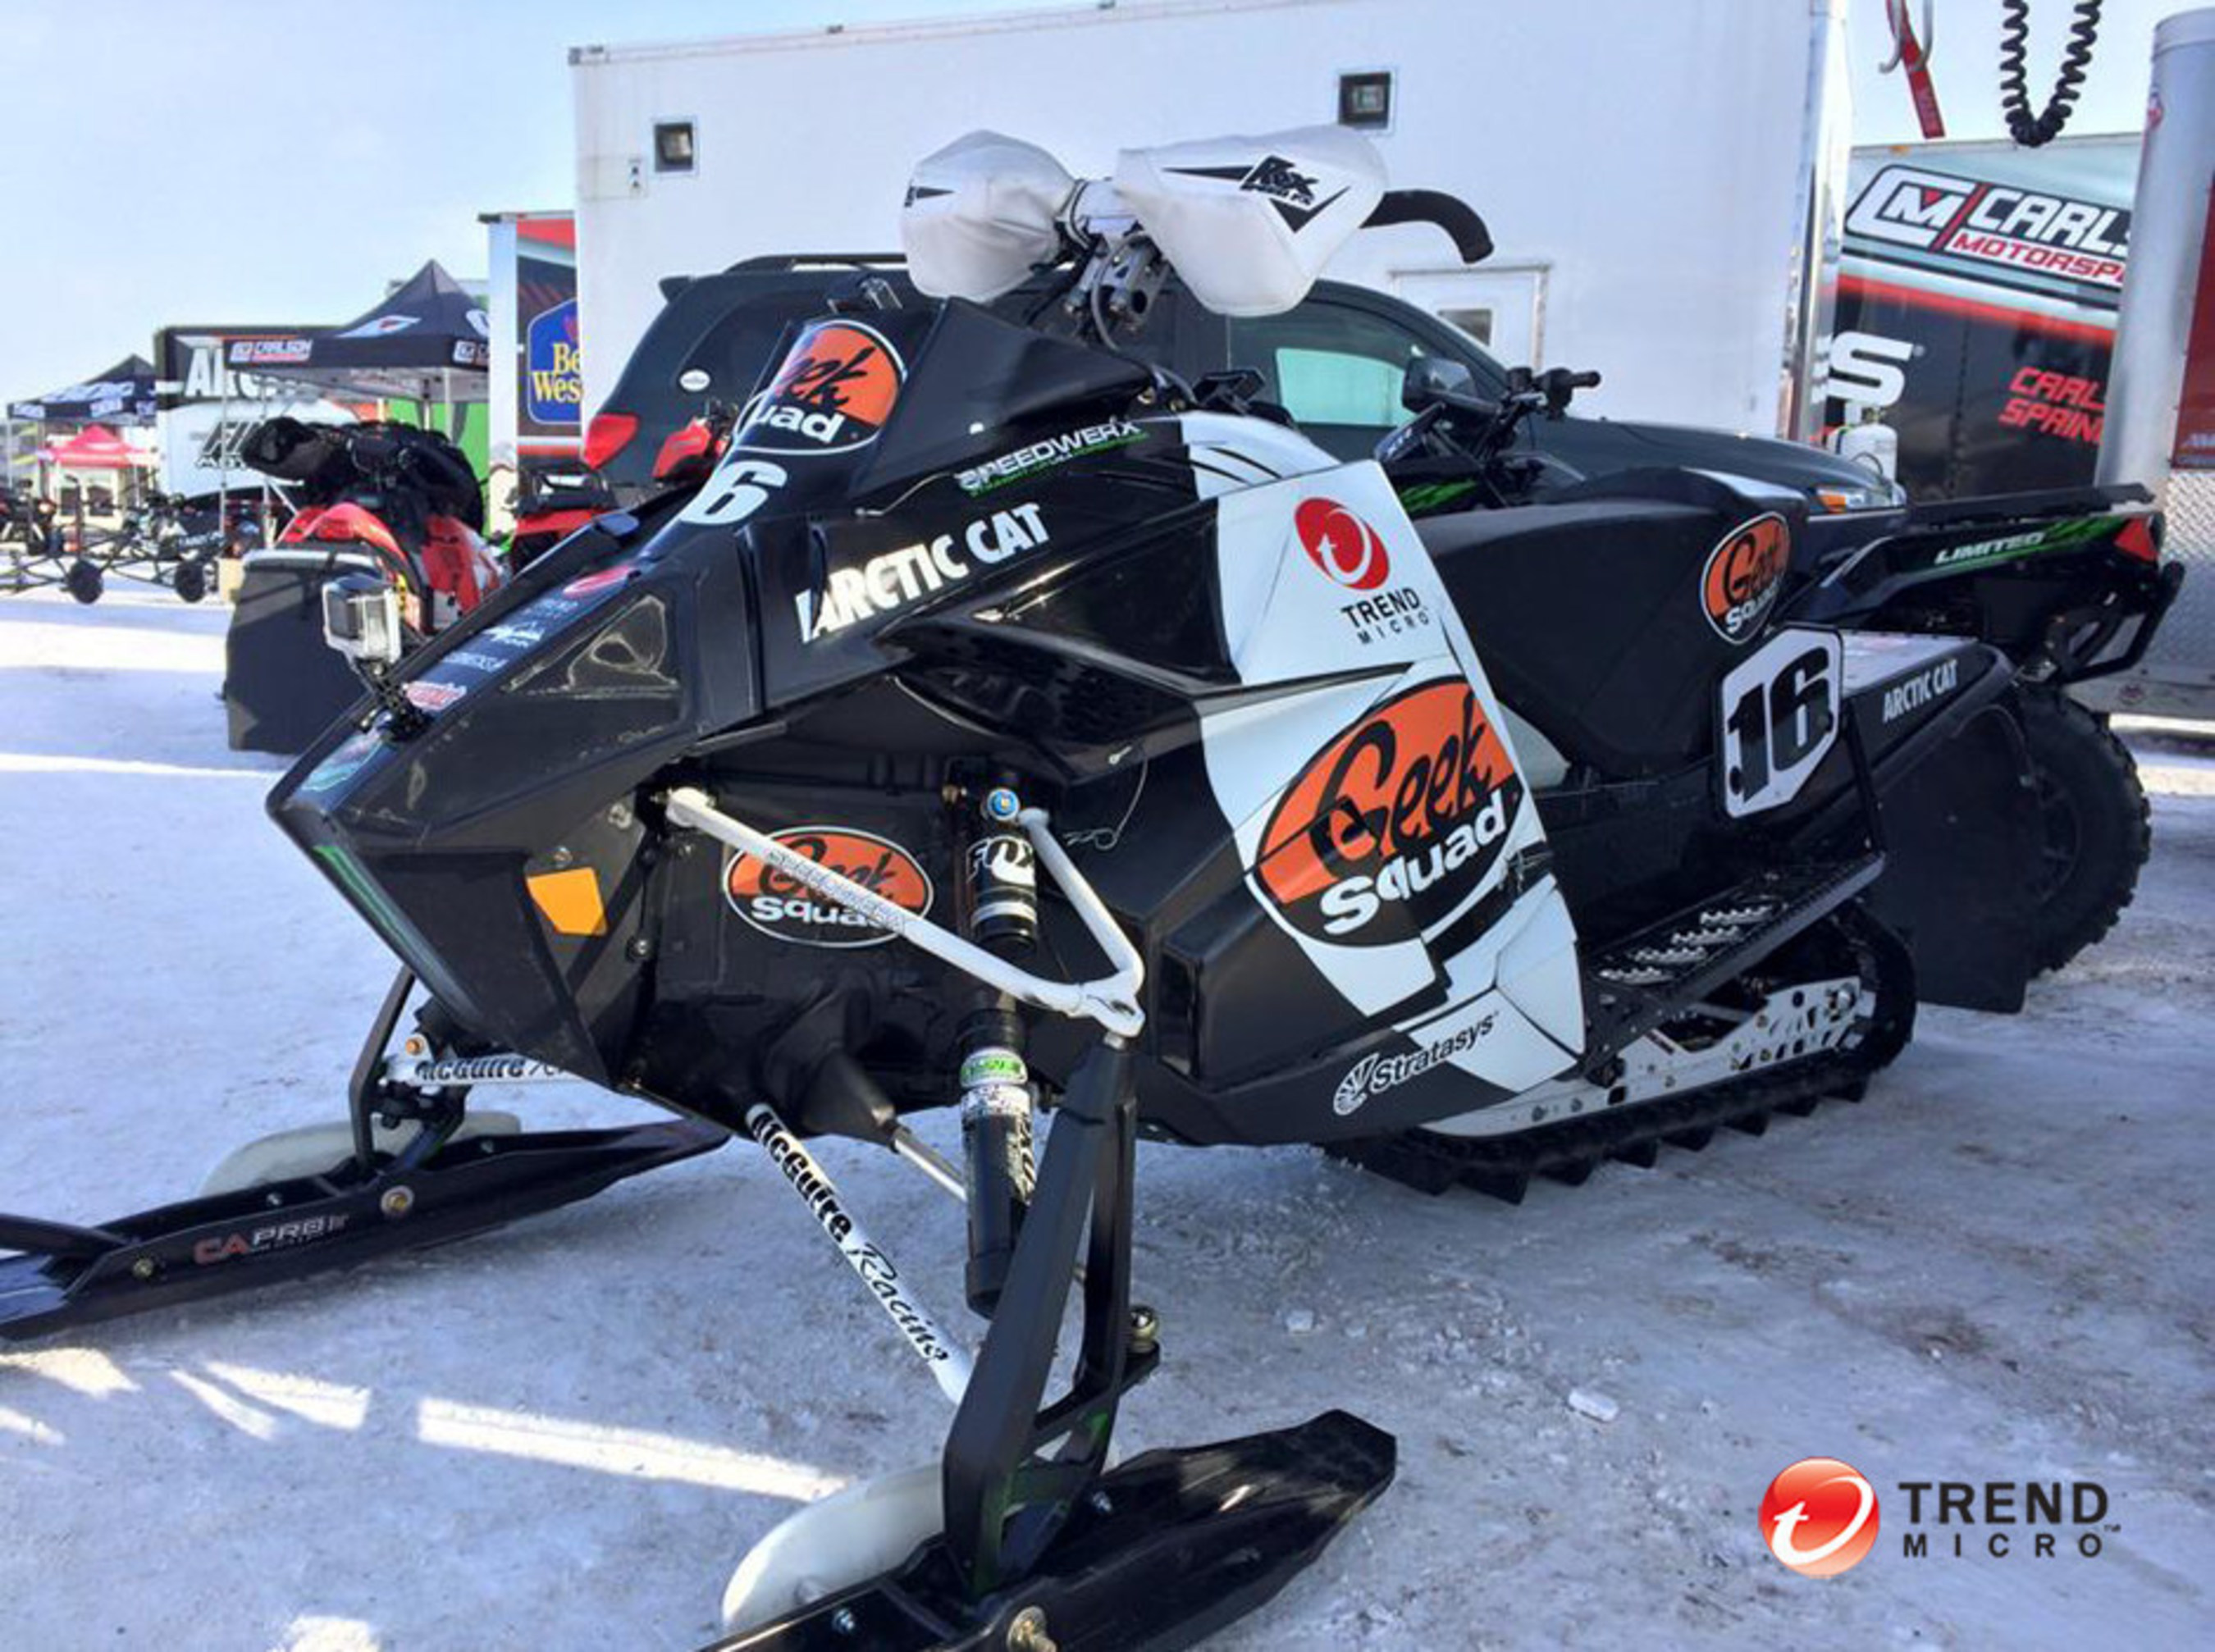 Trend Micro and Best Buy Geek Squad sponsored snowmobile